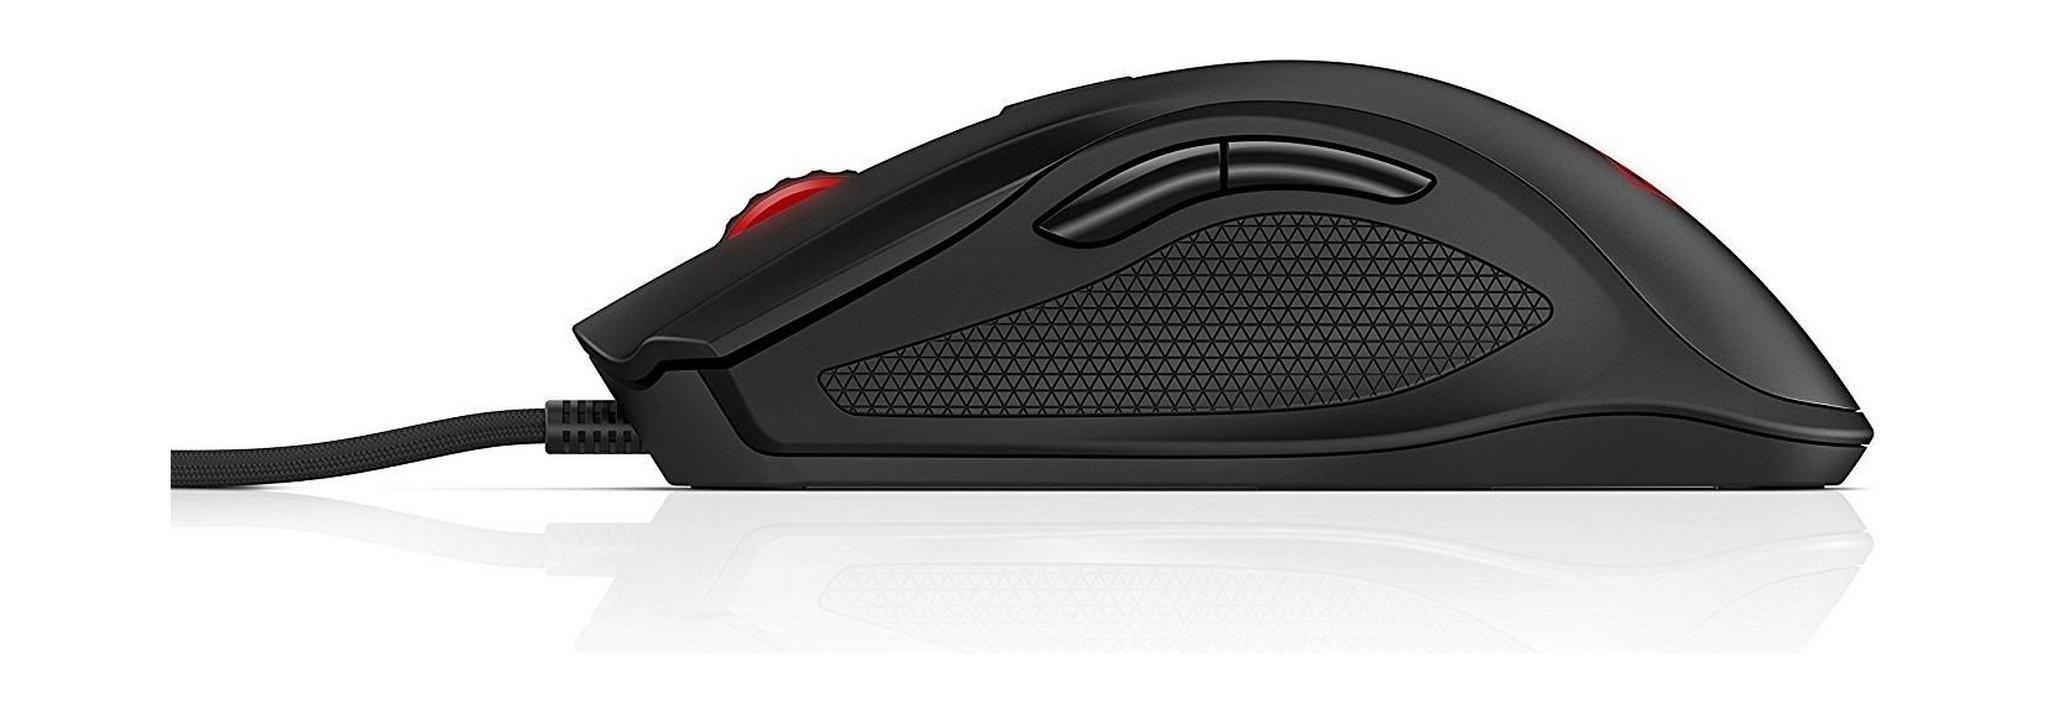 OMEN by HP 600 Gaming Mouse